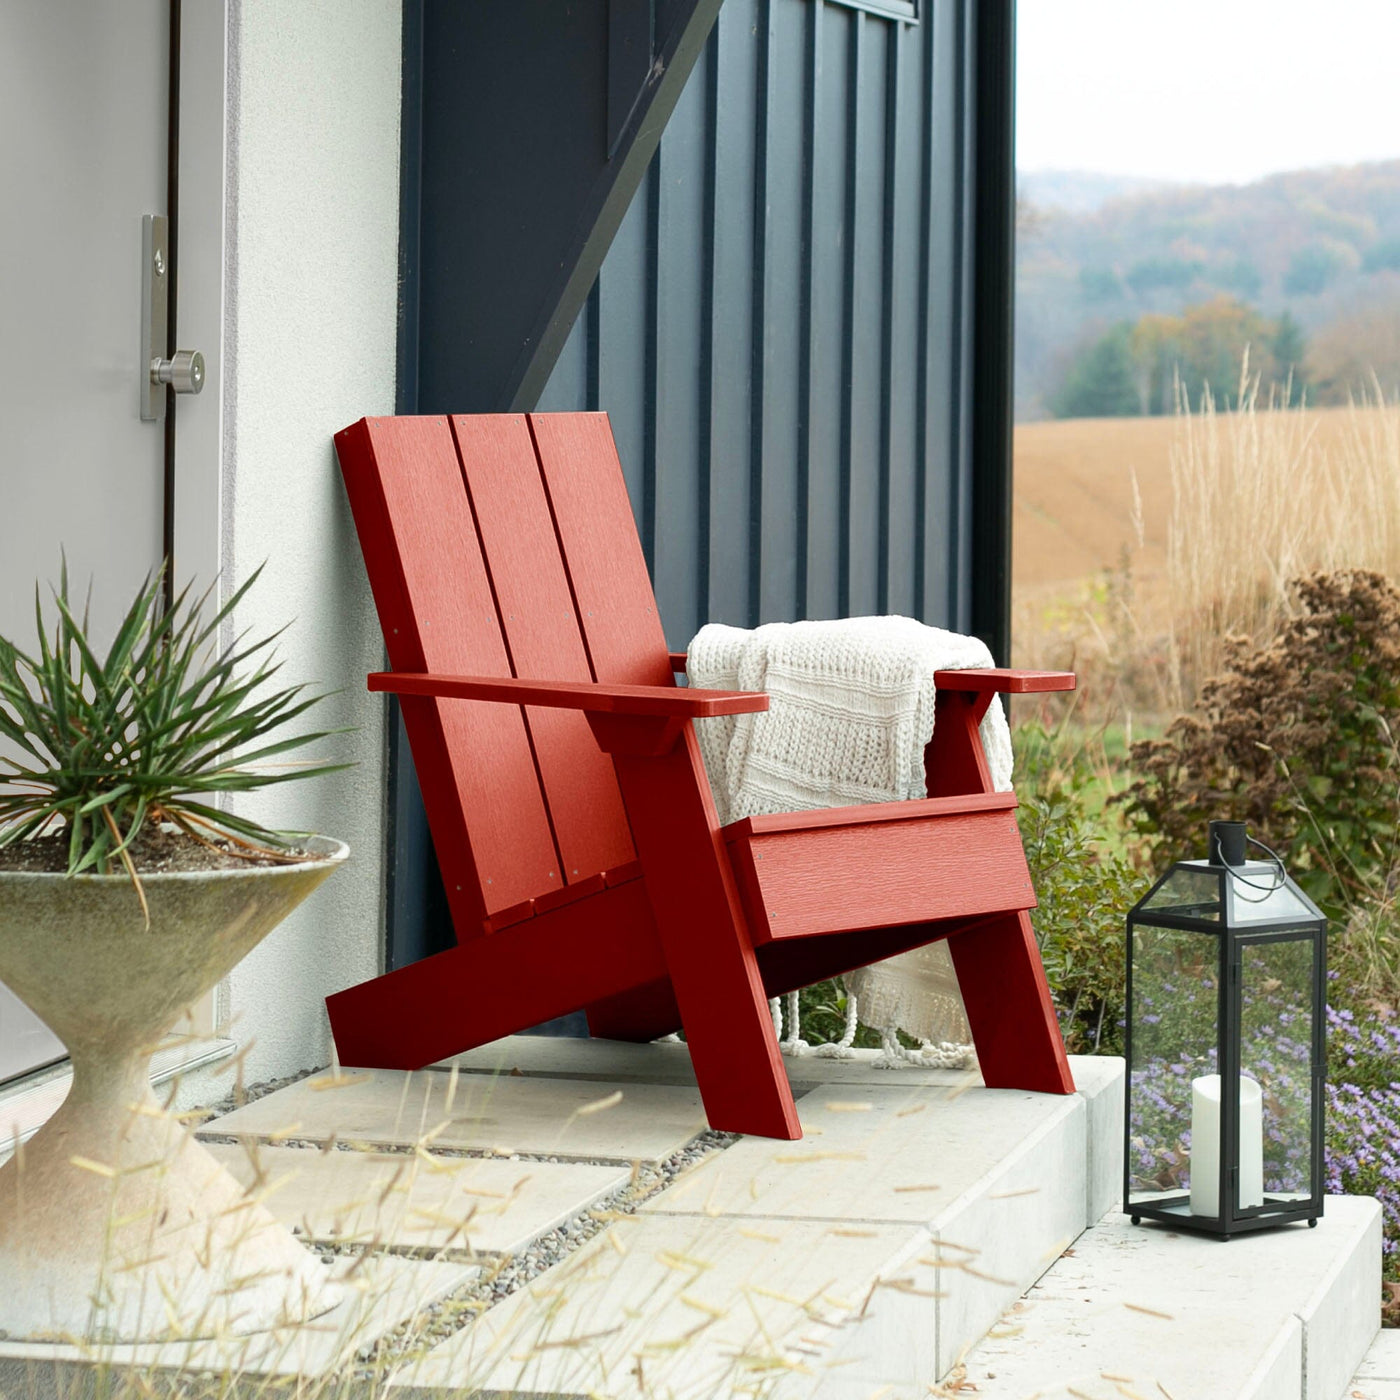 Red Italica Modern Adirondack chair on porch with blanket and lantern